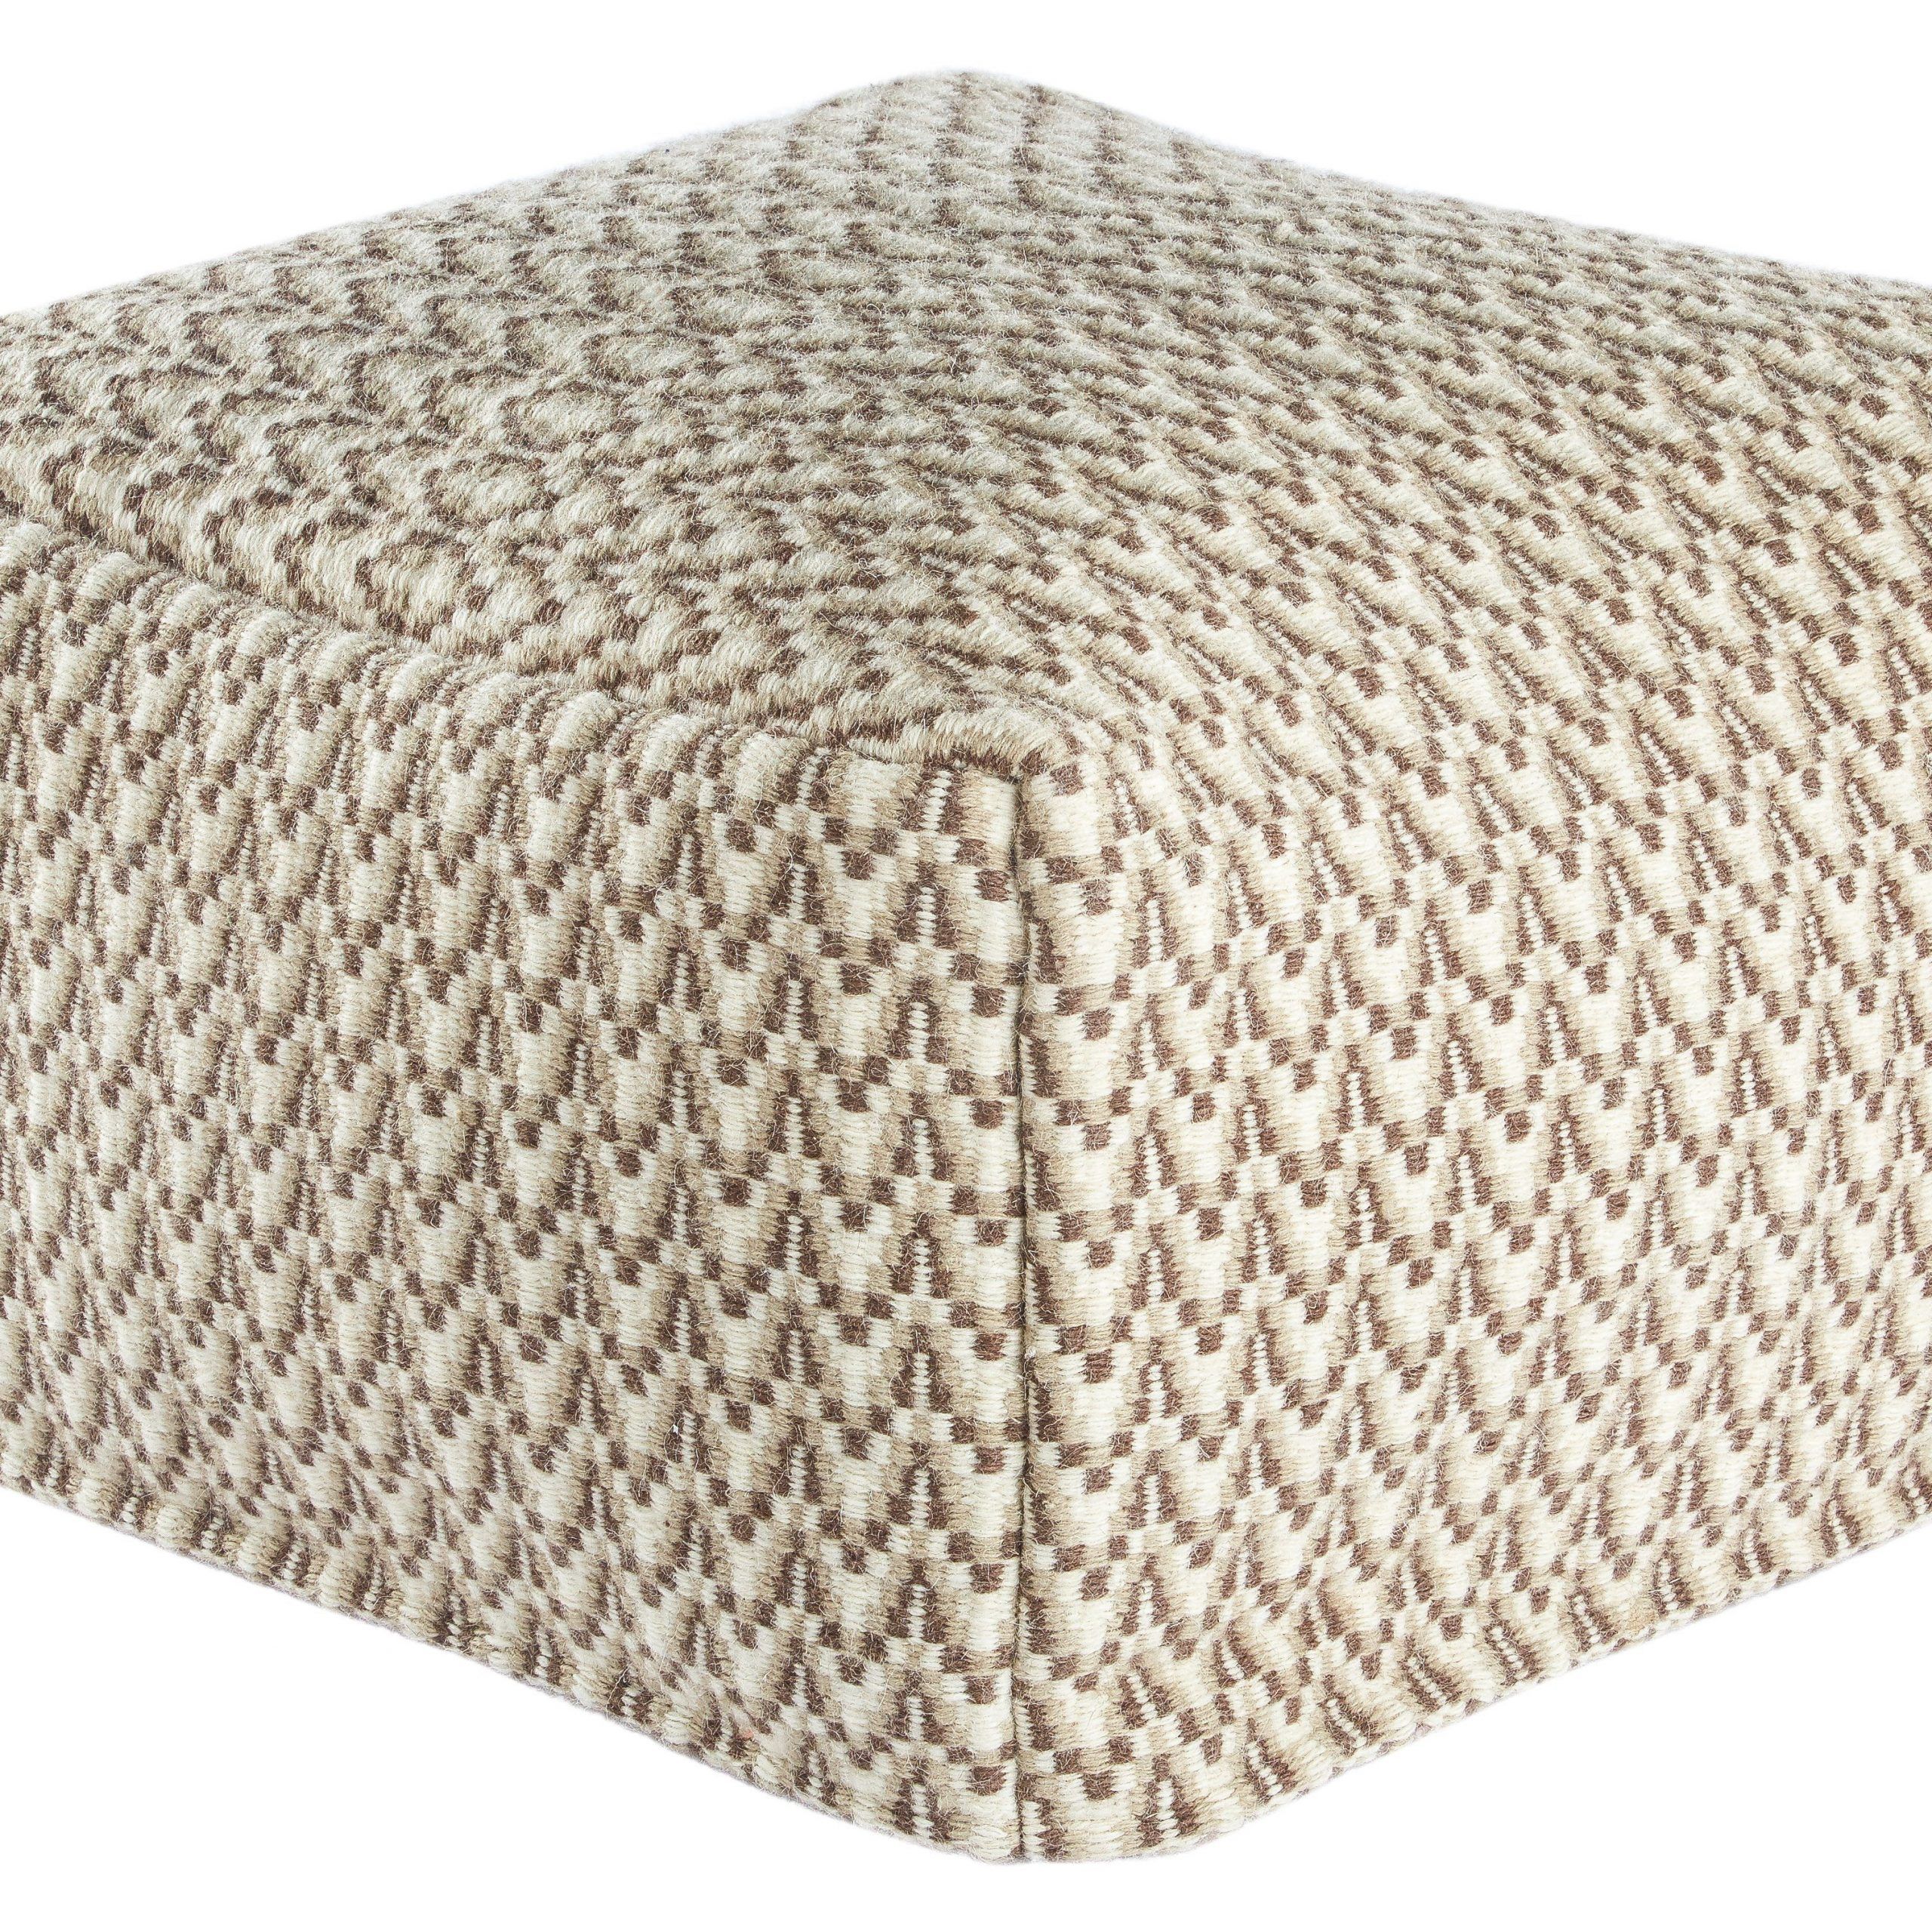 Jaipur Living Scandinavia Scp16 Gray/silver Pouf | Square Pouf, Pouf Within Gray Stripes Cylinder Pouf Ottomans (View 5 of 20)